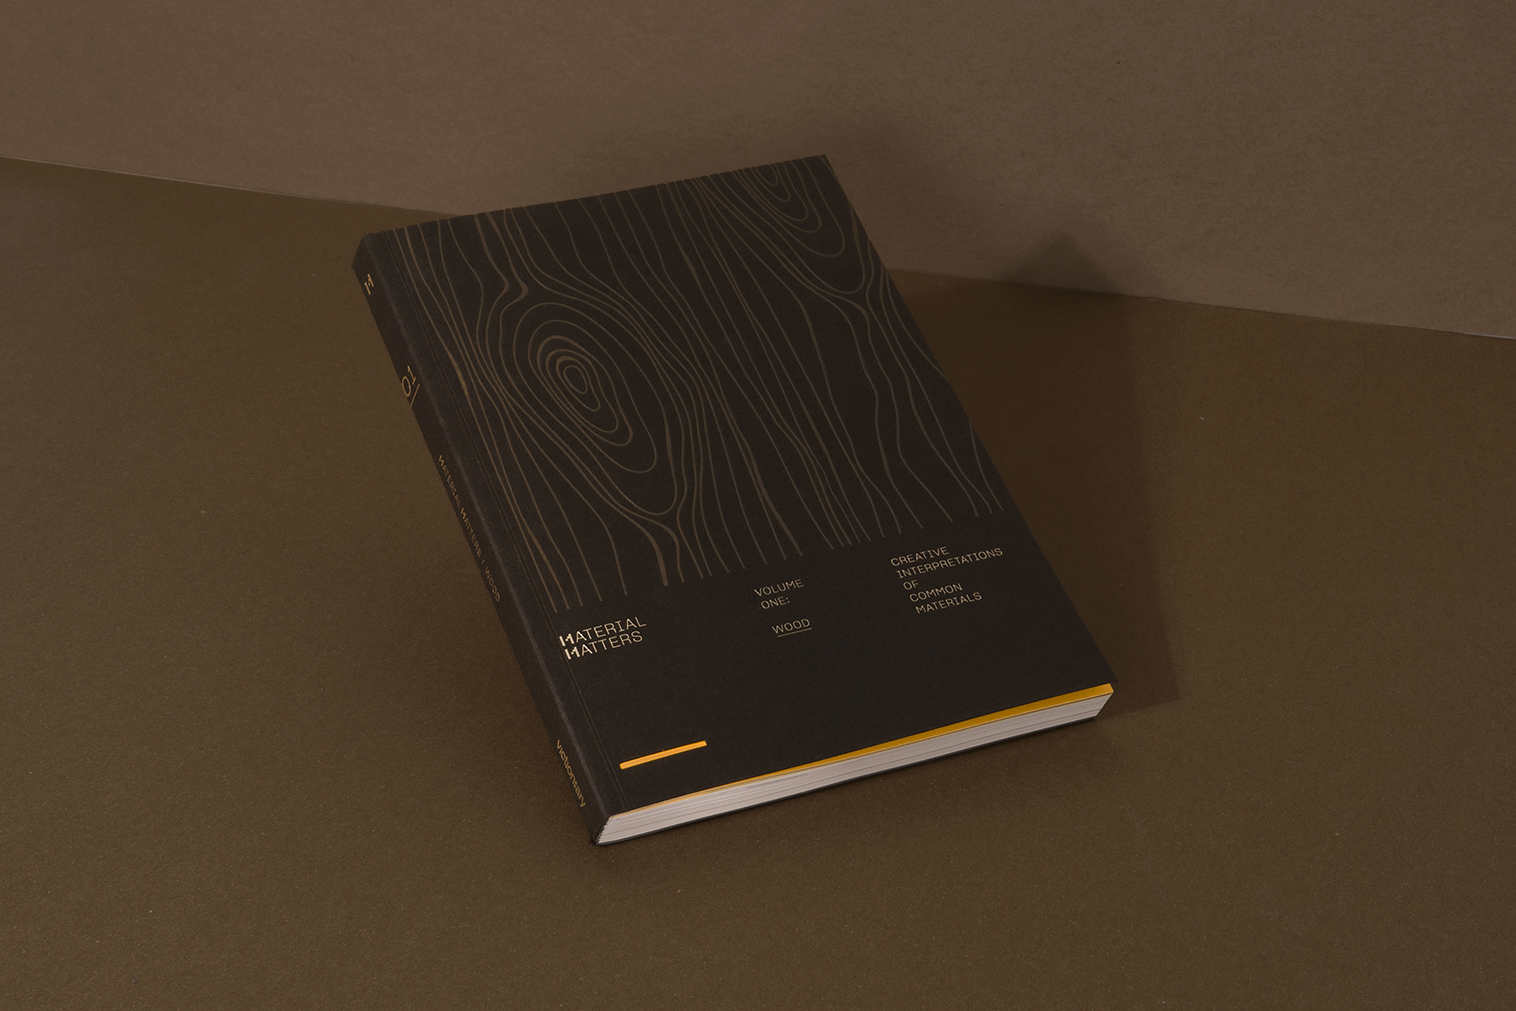 From Material Matters 01: Wood copyright Victionary 2019